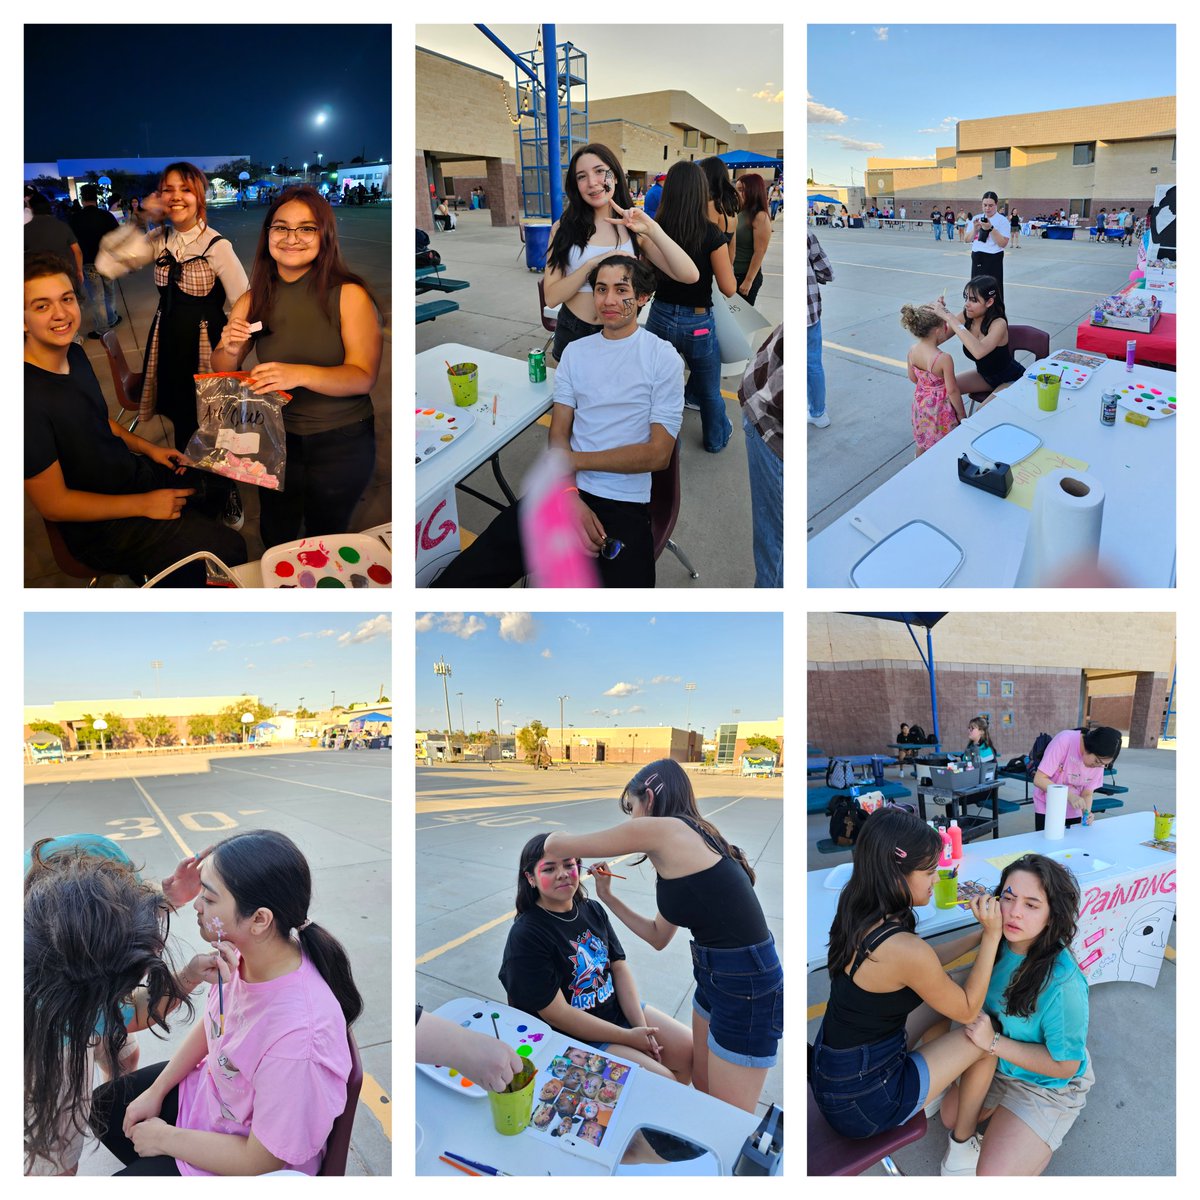 Americas homecoming carnival- Art club facepainting booth. #BetterTogether #SISDFineArts #TeamSISD